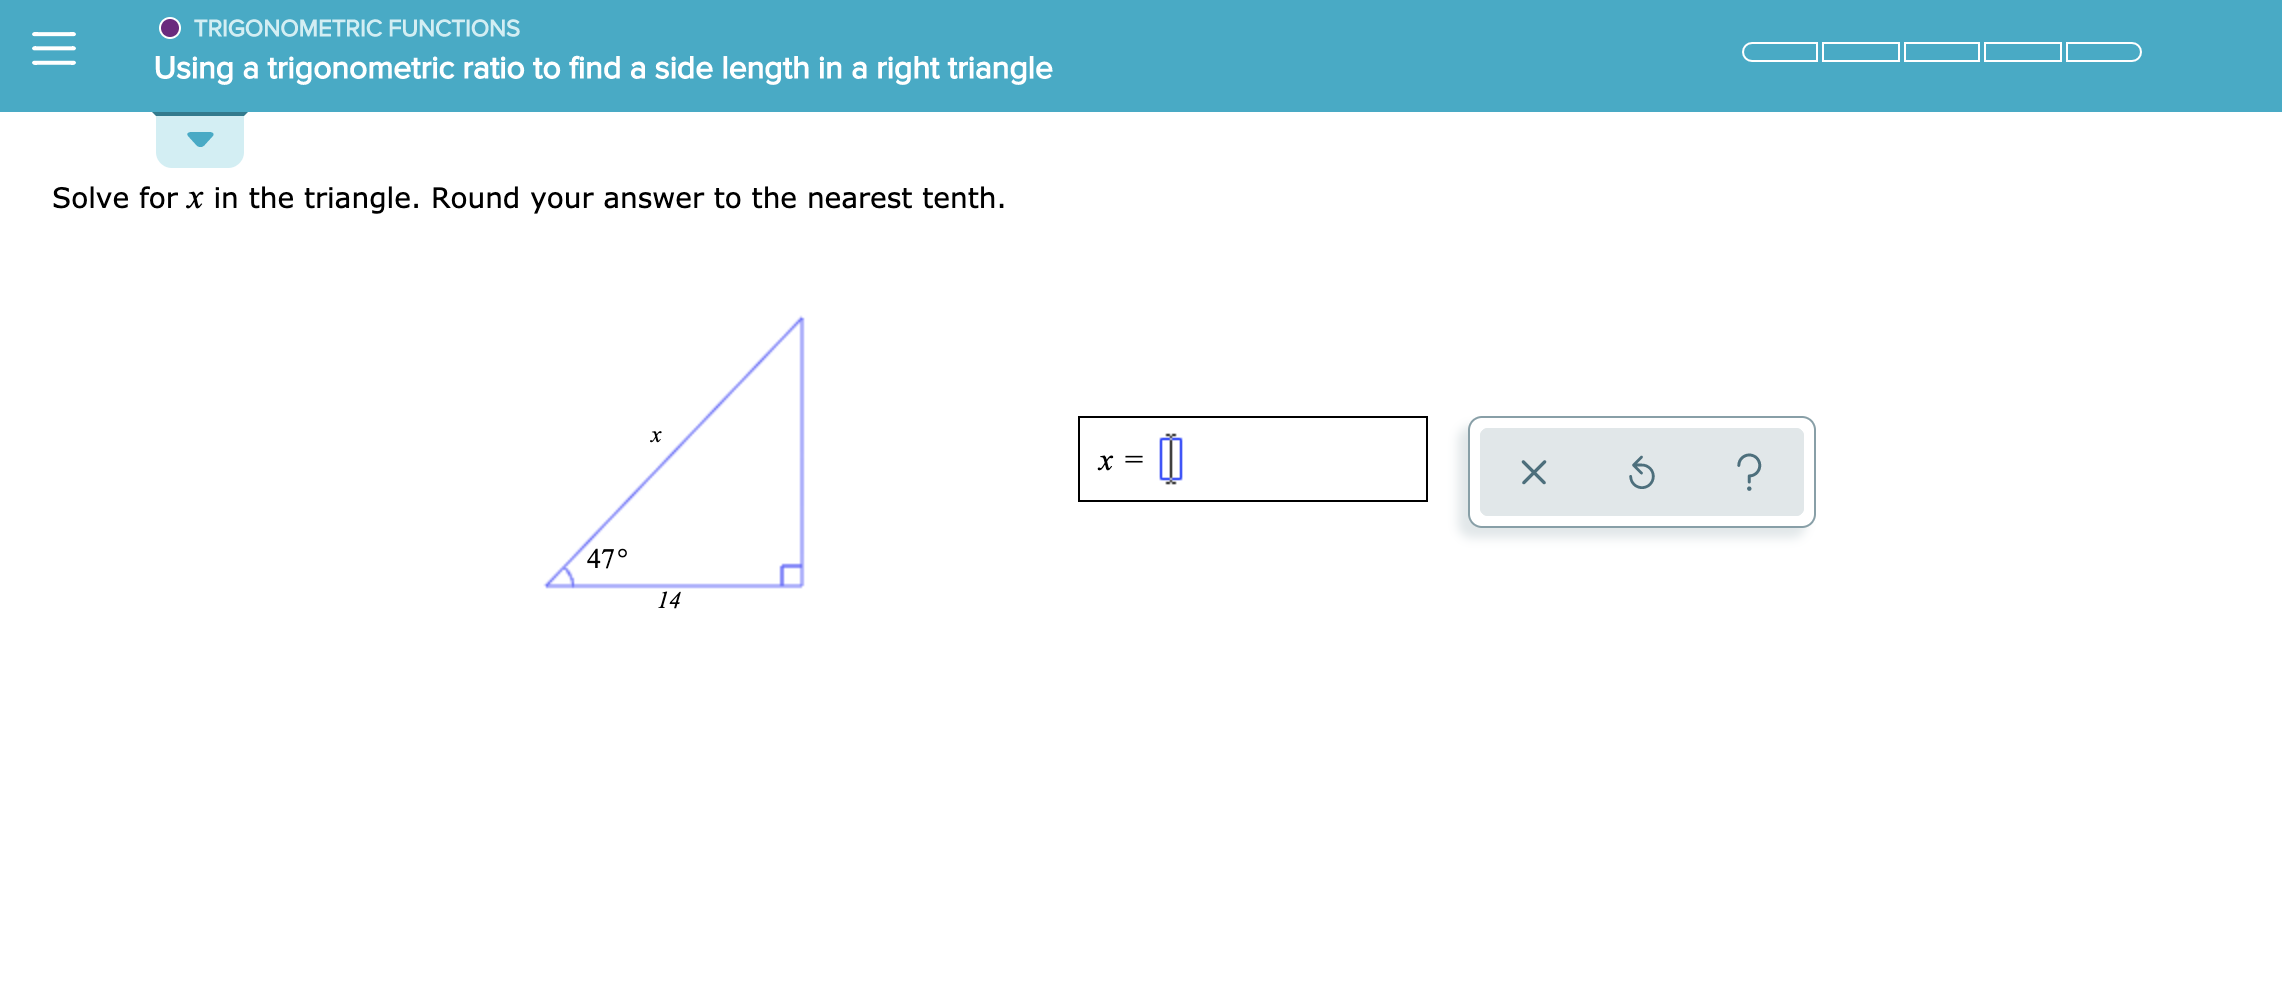 O TRIGONOMETRIC FUNCTIONS
Using a trigonometric ratio to find a side length in a right triangle
Solve for x in the triangle. Round your answer to the nearest tenth.
X
?
47°
14
